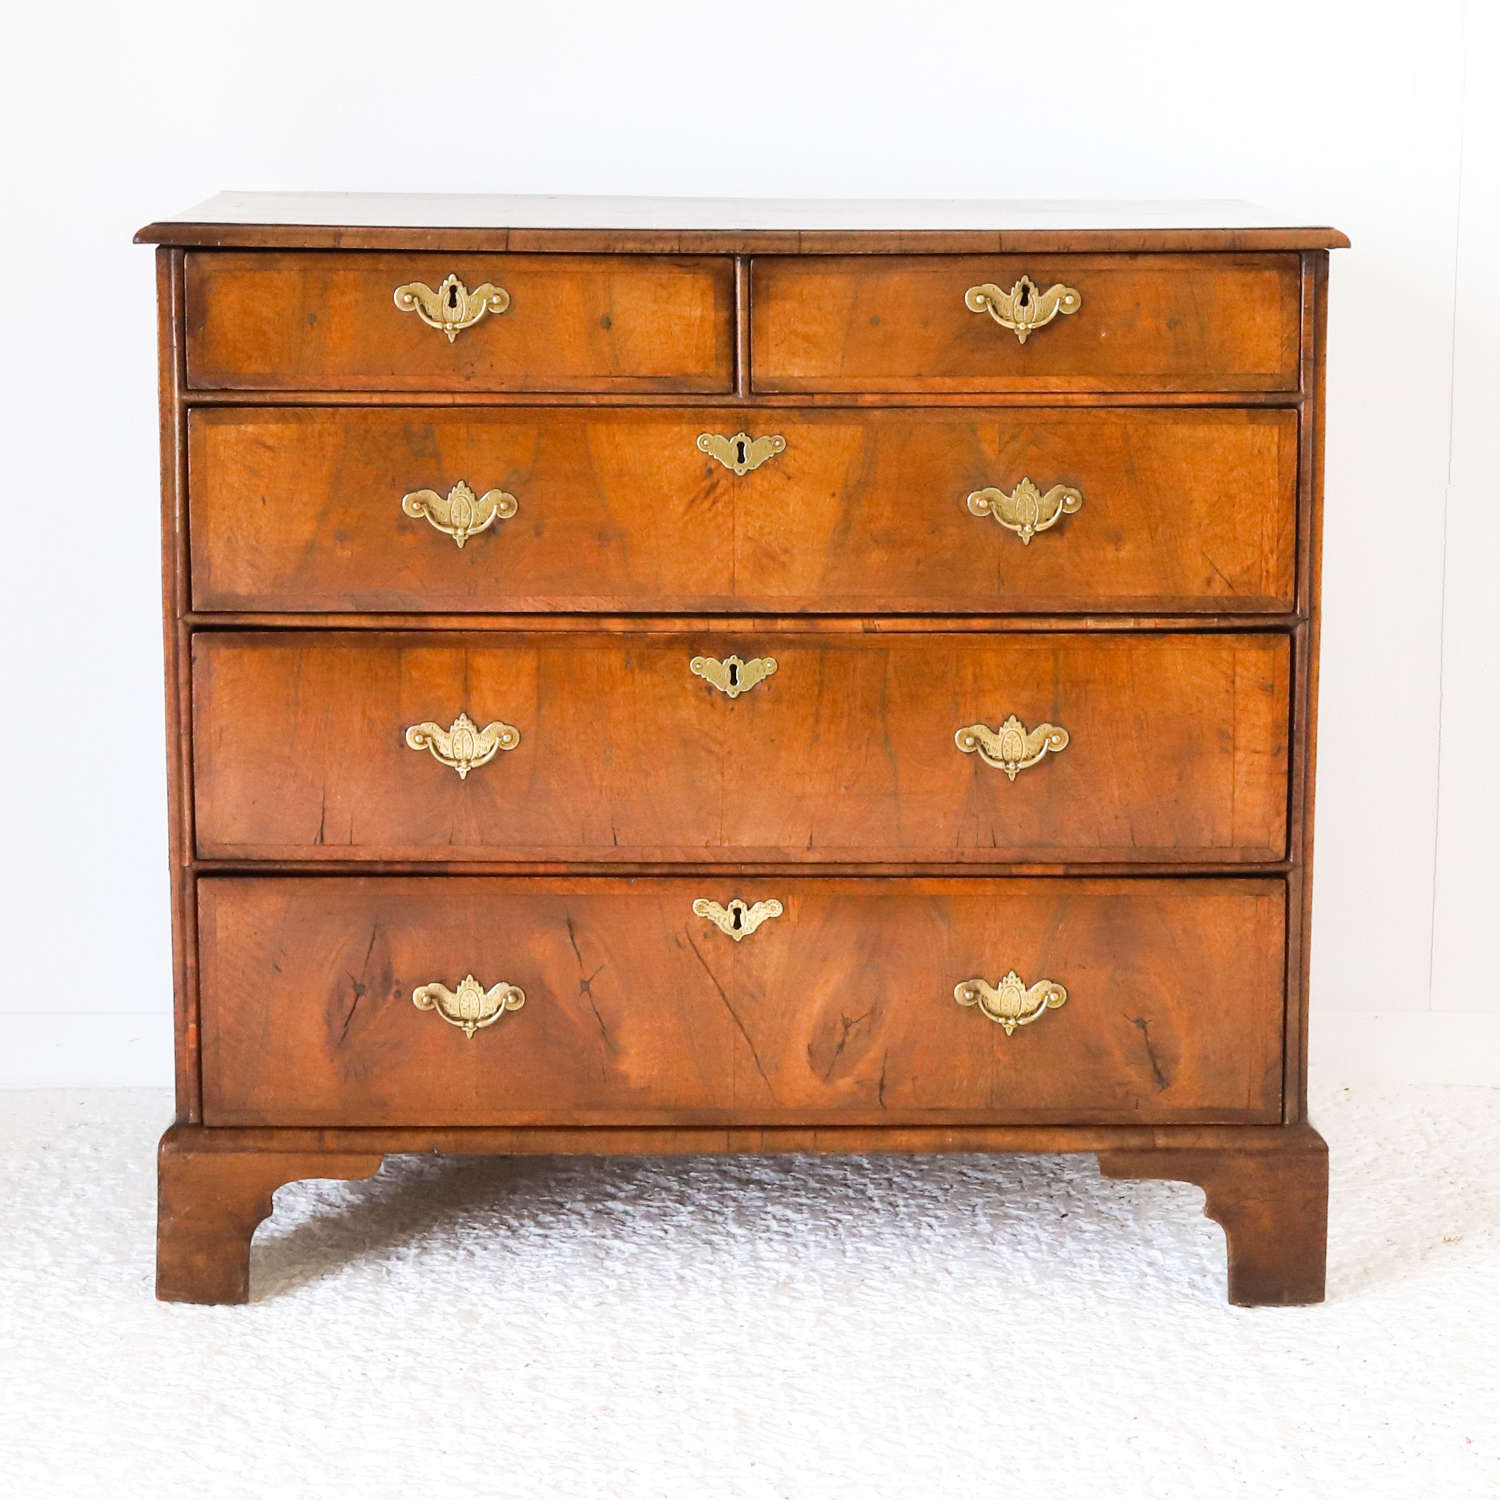 English Georgian walnut chest of drawers 2 over 3 in configuration